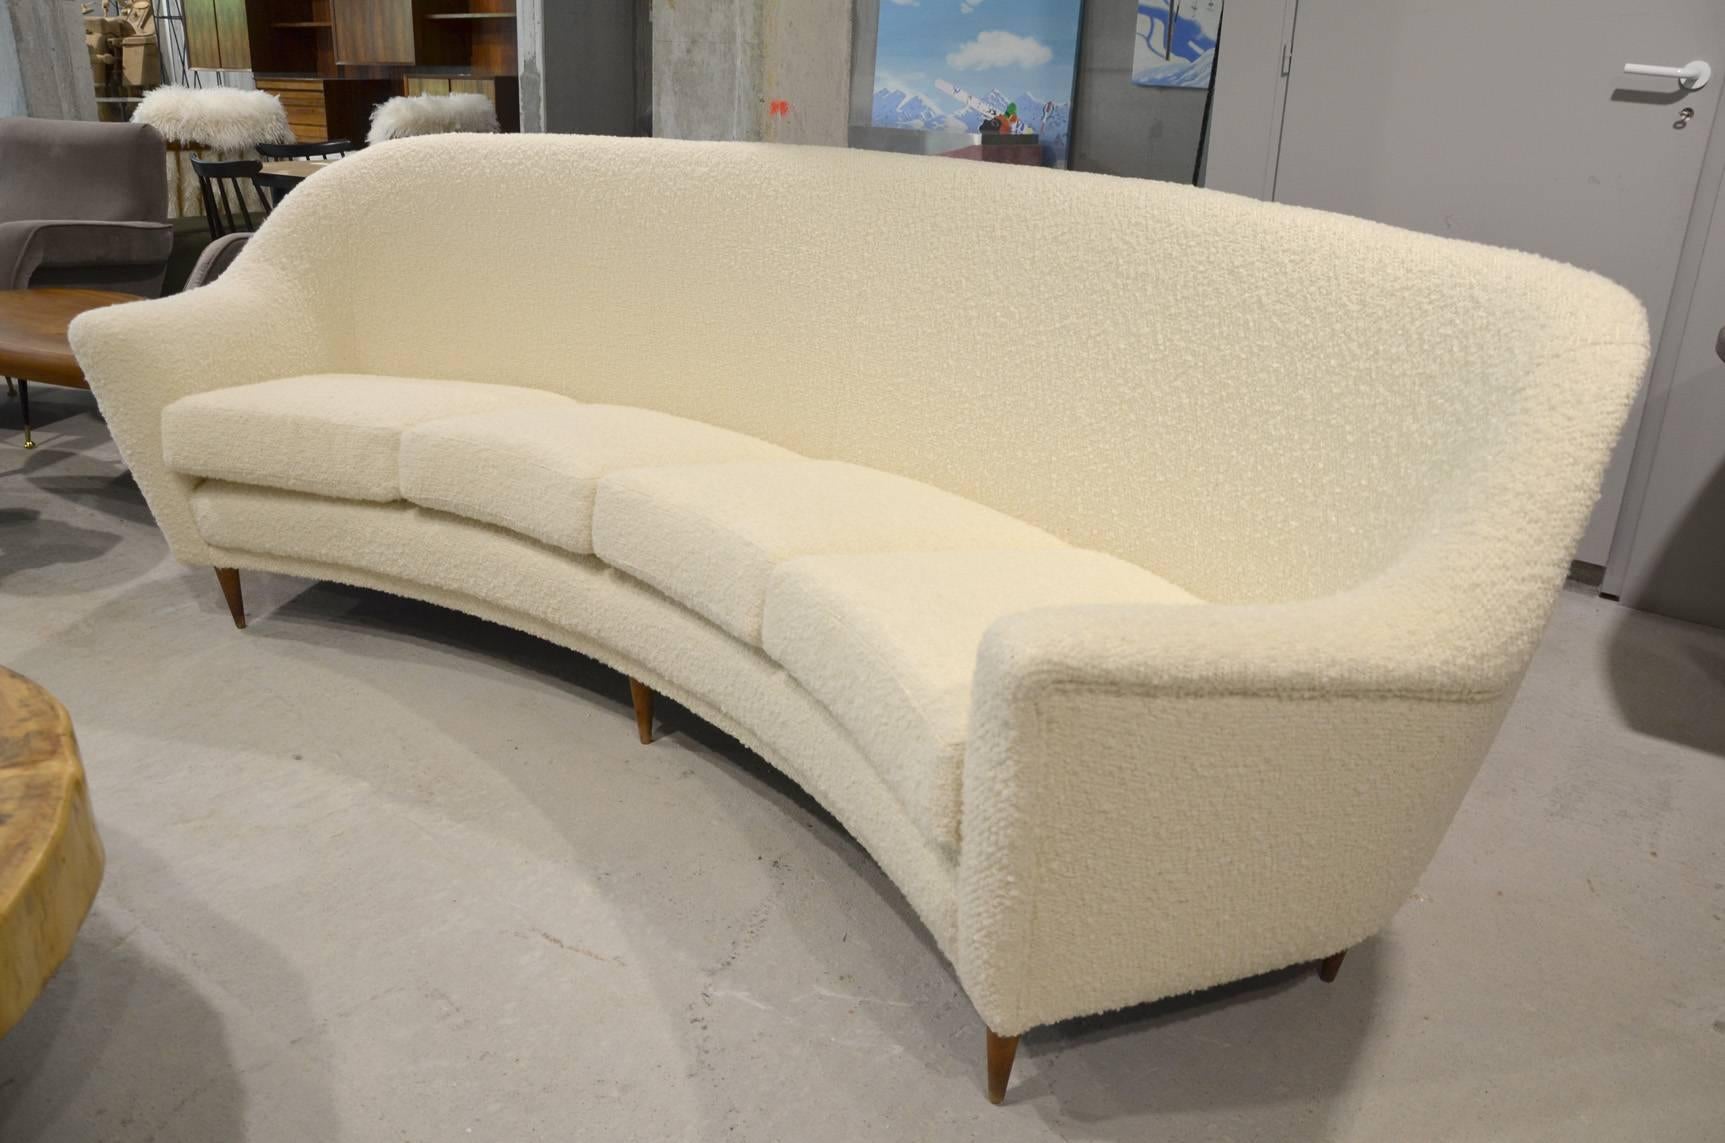 Fantastic pair of Italian reupholstered sofas. Reupholstered in a white wool fabric.